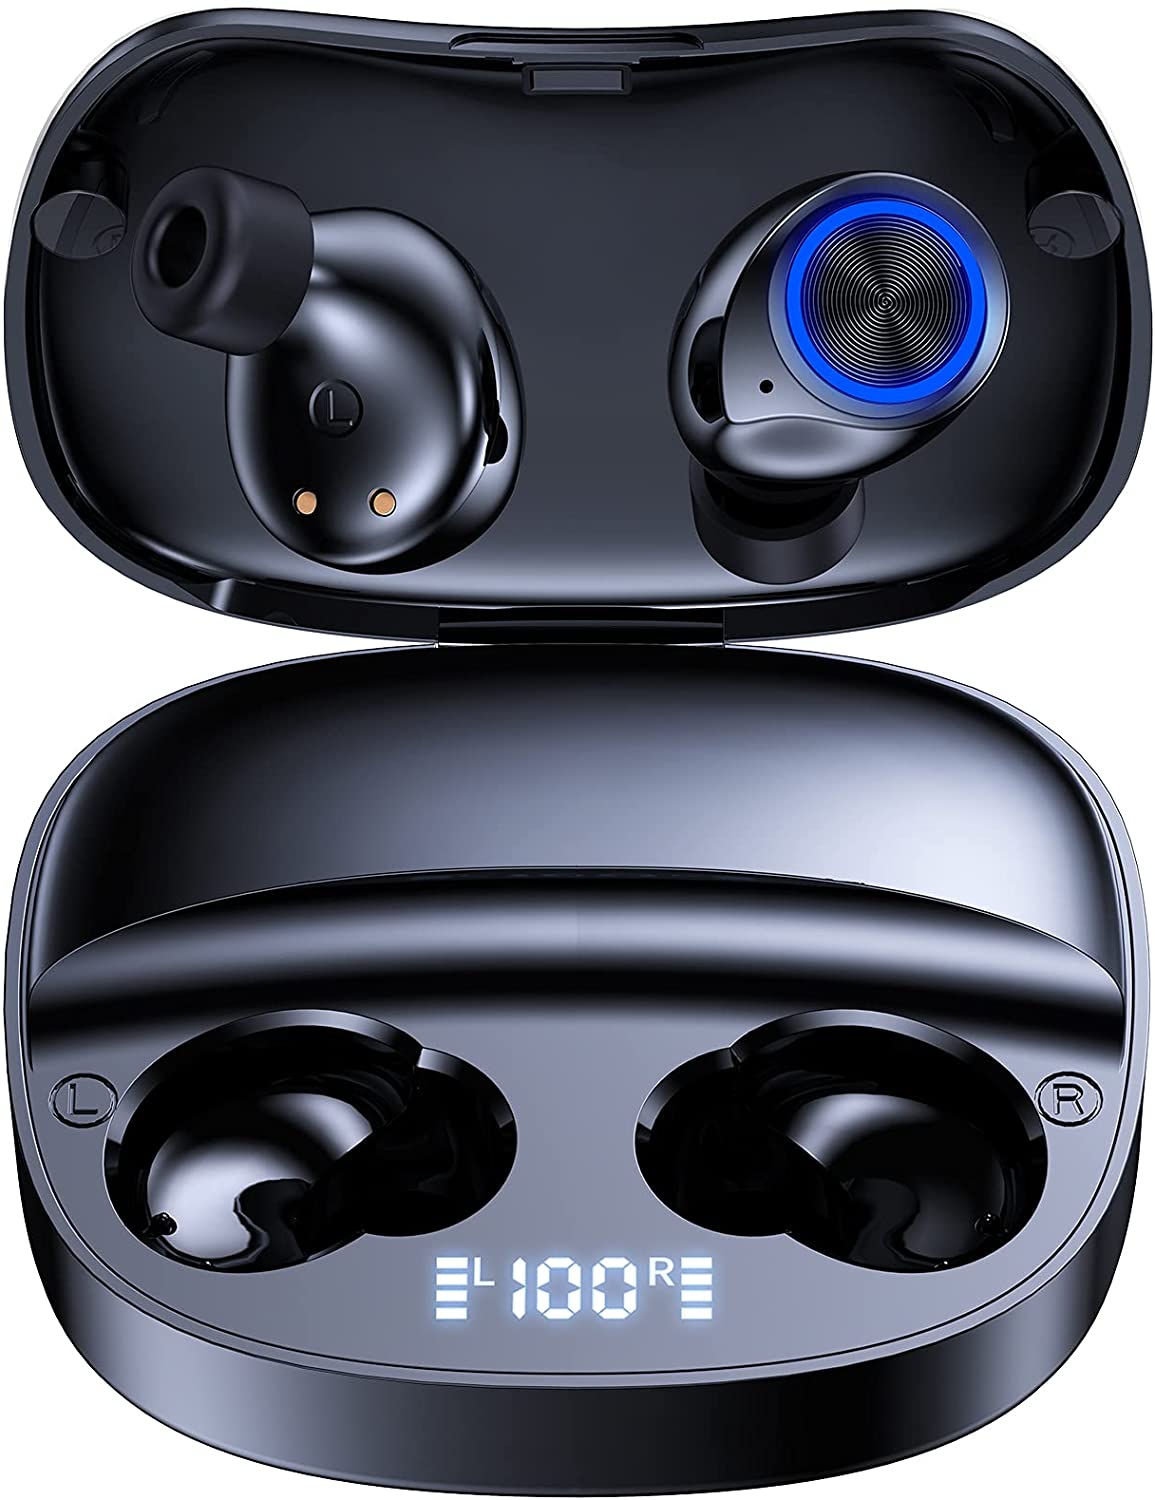 Wireless Earbuds，Bluetooth 5.0 Headphones Touch Control with Wireless Charging Case IPX8 Waterproof TWS Stereo Earphones Built-in Mic Headset Deep Bass for iPhone/Android & Work/Running/Travel/Gym 